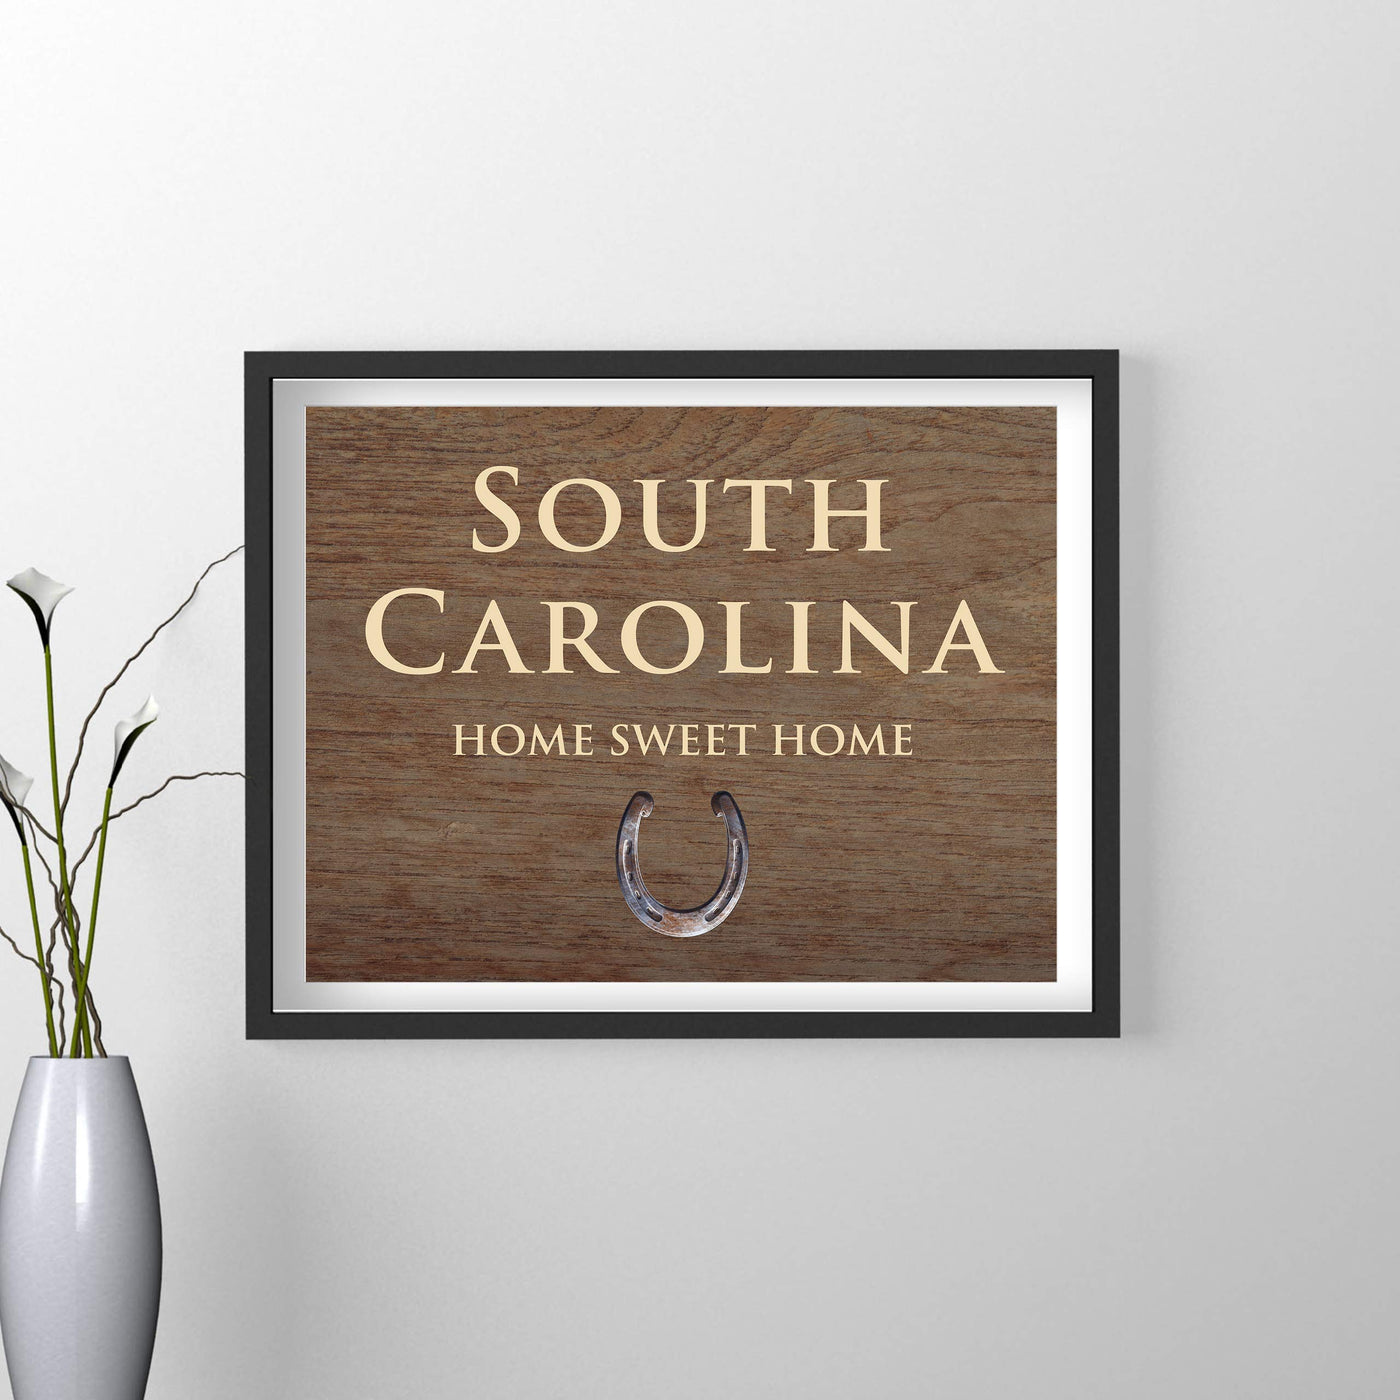 South Carolina-Home Sweet Home Inspirational Family Wall Art-10x8" Country Rustic State Print-Ready to Frame. Home-Office-Welcome-Farmhouse Decor. Great Housewarming Gift! Printed on Photo Paper.